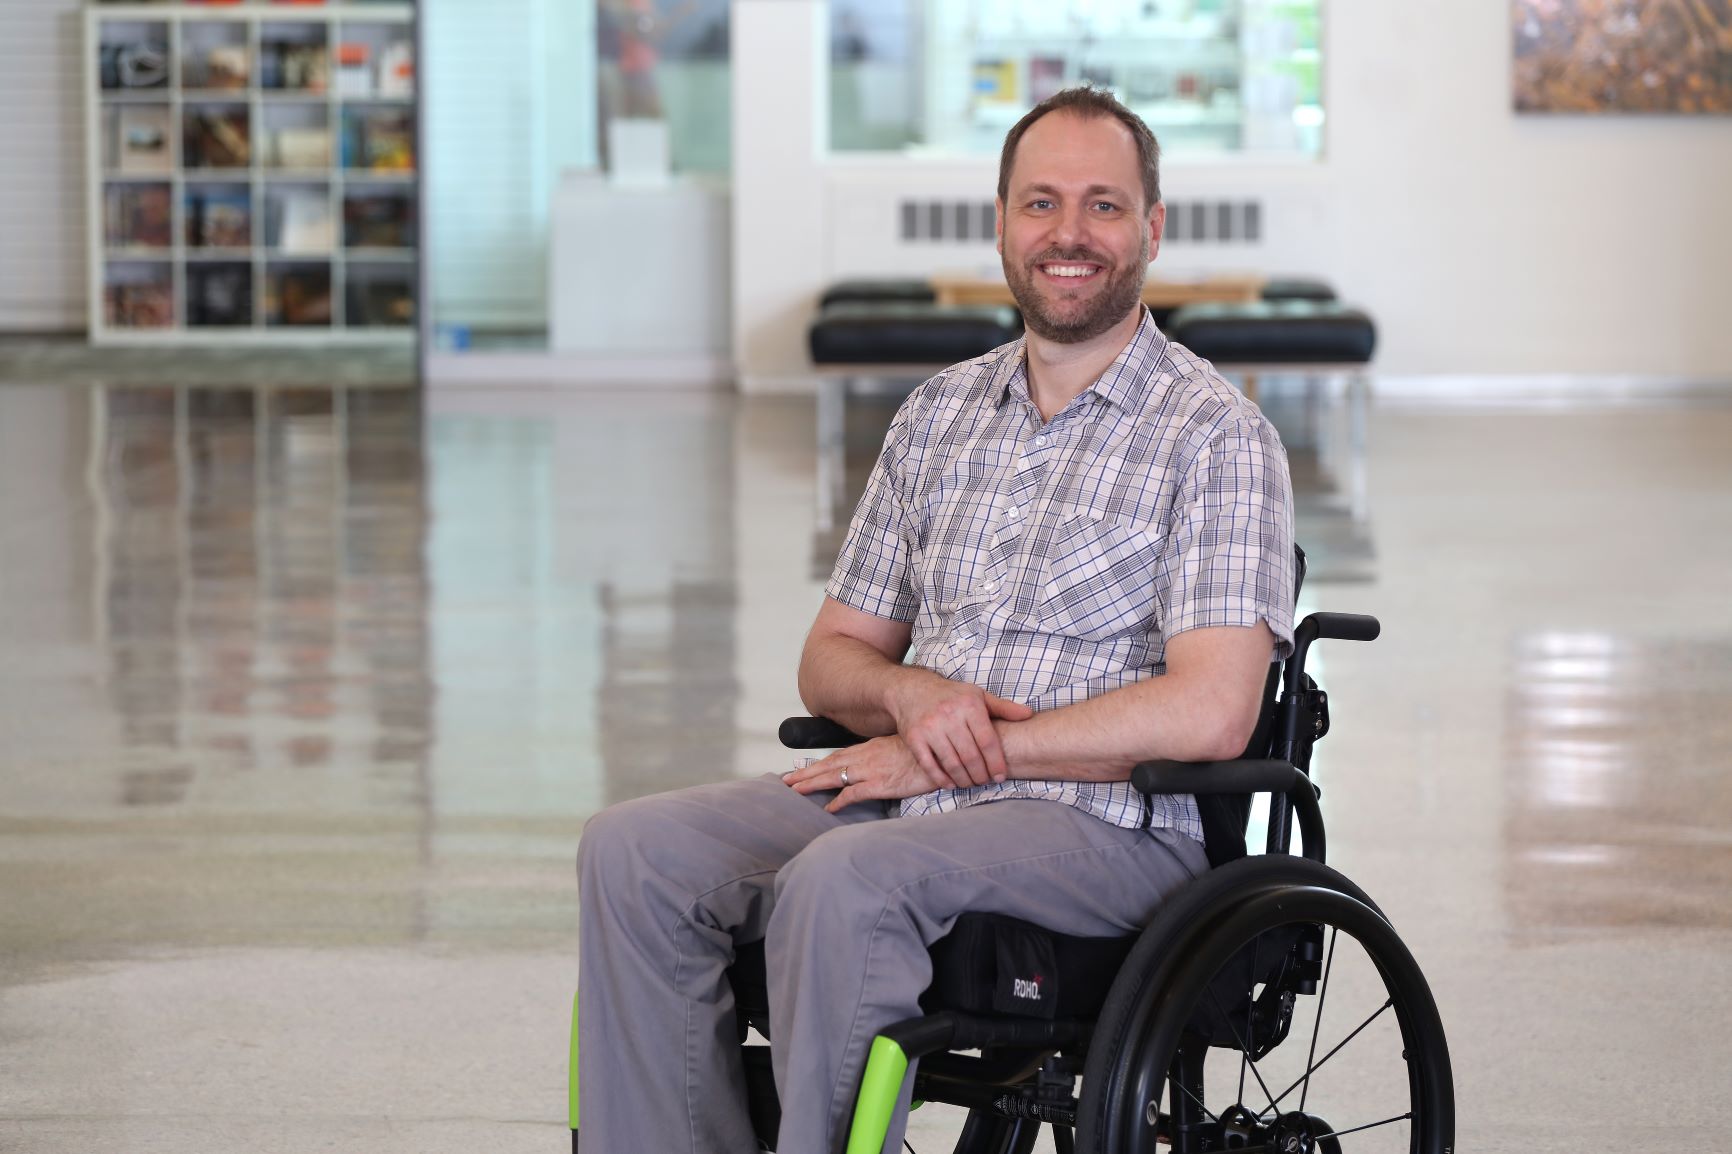 Andrew Ashby is smiling. He sits in his wheelchair in a bright, open room.